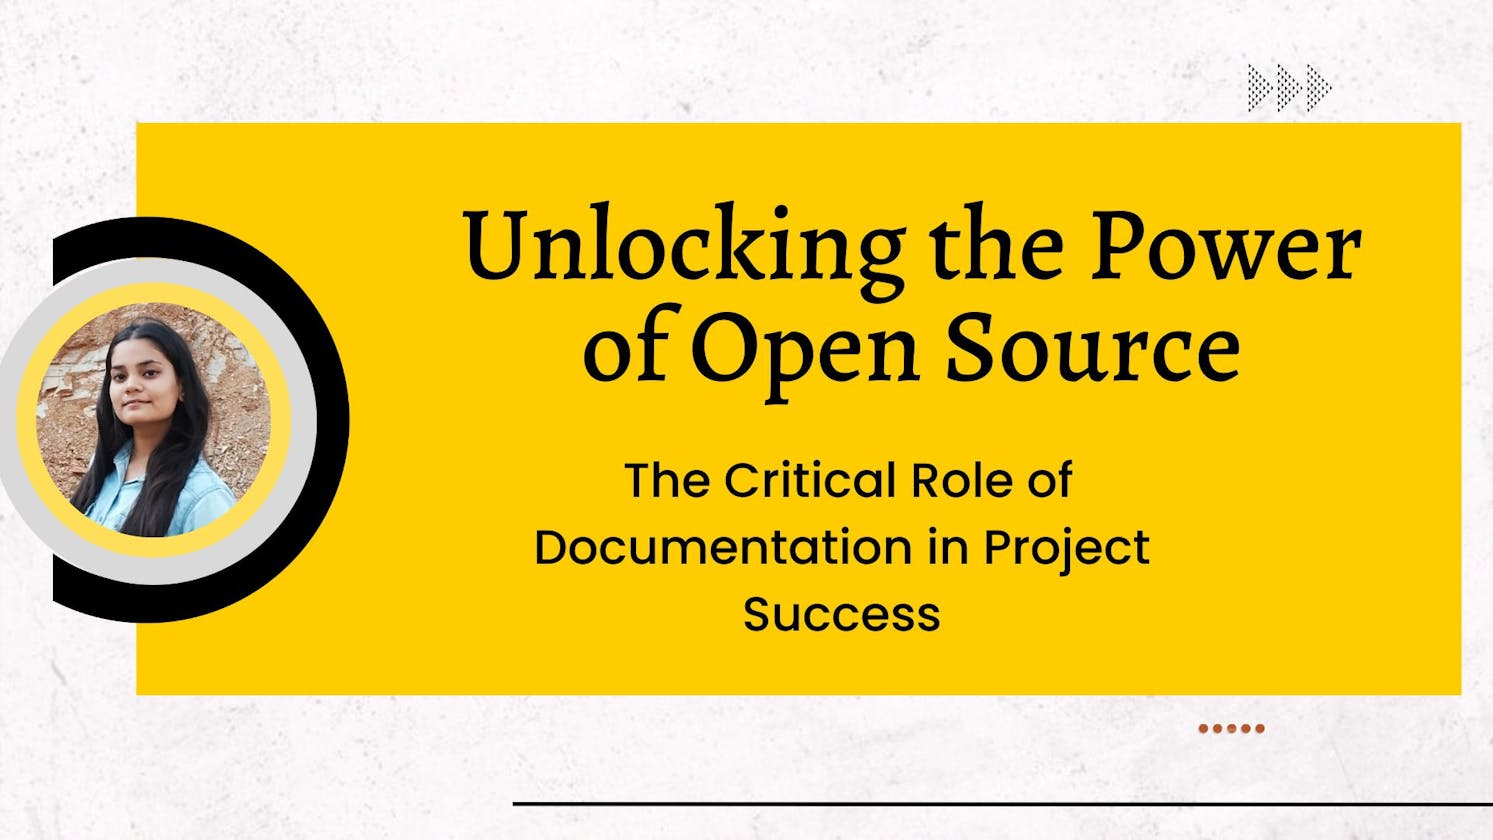 The Critical Role of Documentation in Project Success